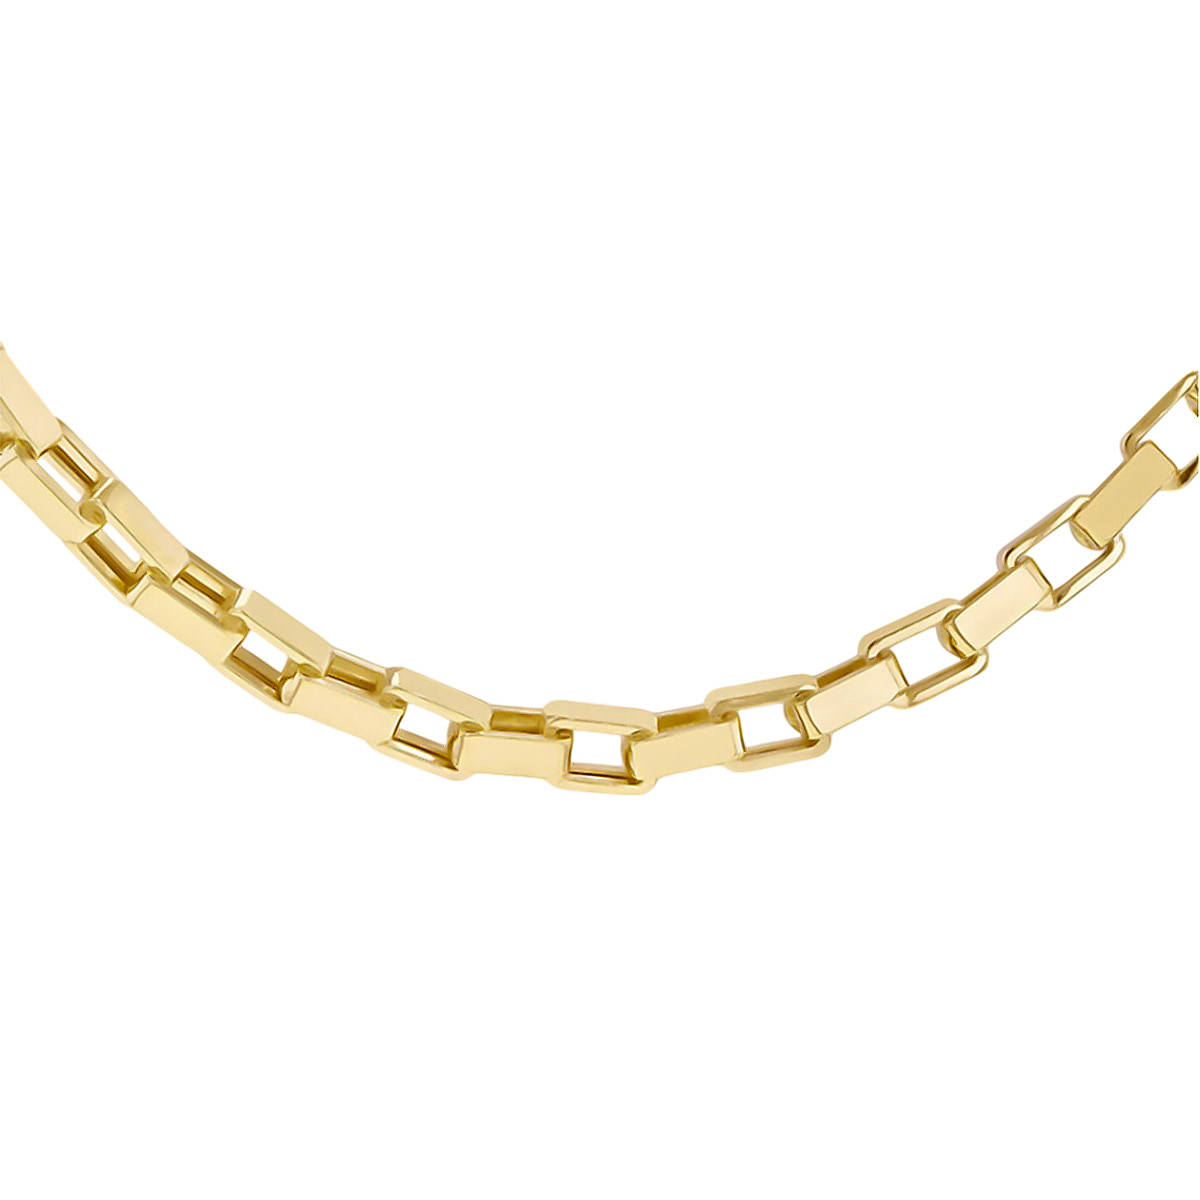 Vicenzaro Closeout - 9K Yellow Gold Square Cable Necklace (Size - 18), Gold Wt. 9.7 Gms